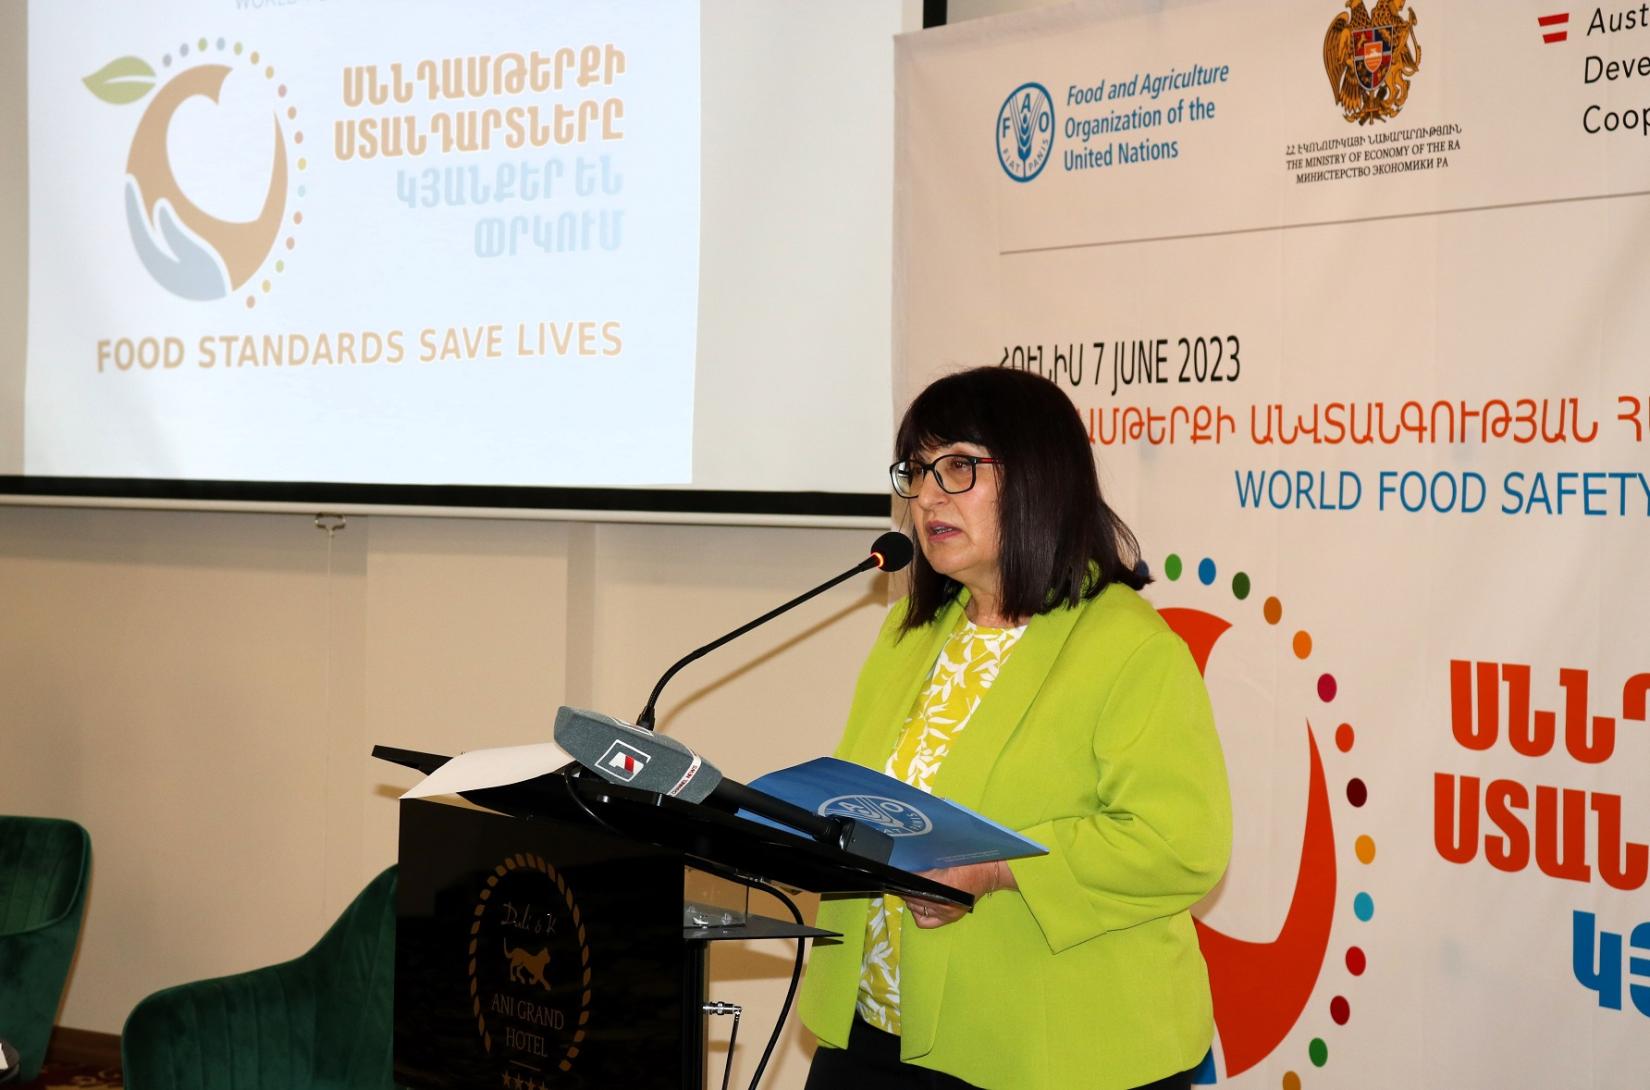 A woman delivers a speech on the World Food Safety Day.